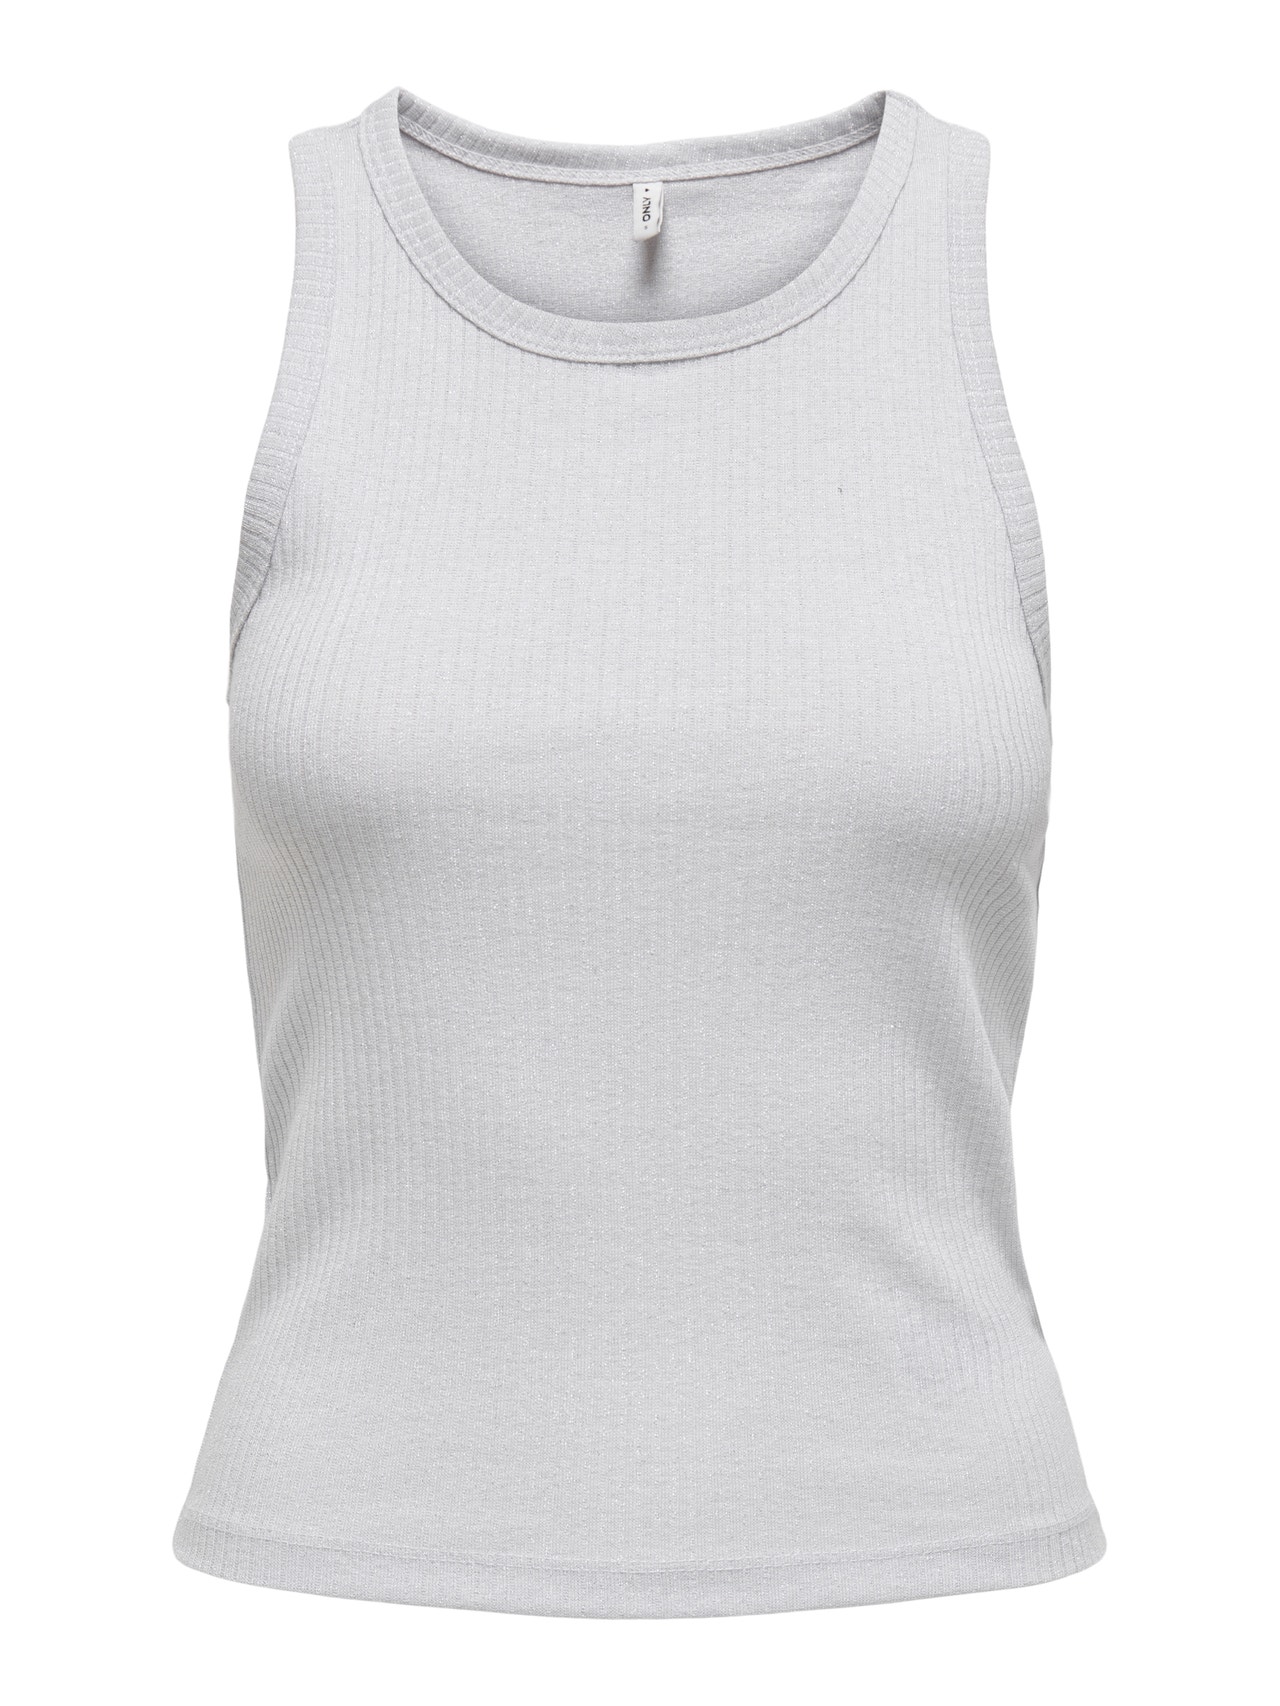 ONLY Regular Fit Round Neck Top -Bright White - 15325975